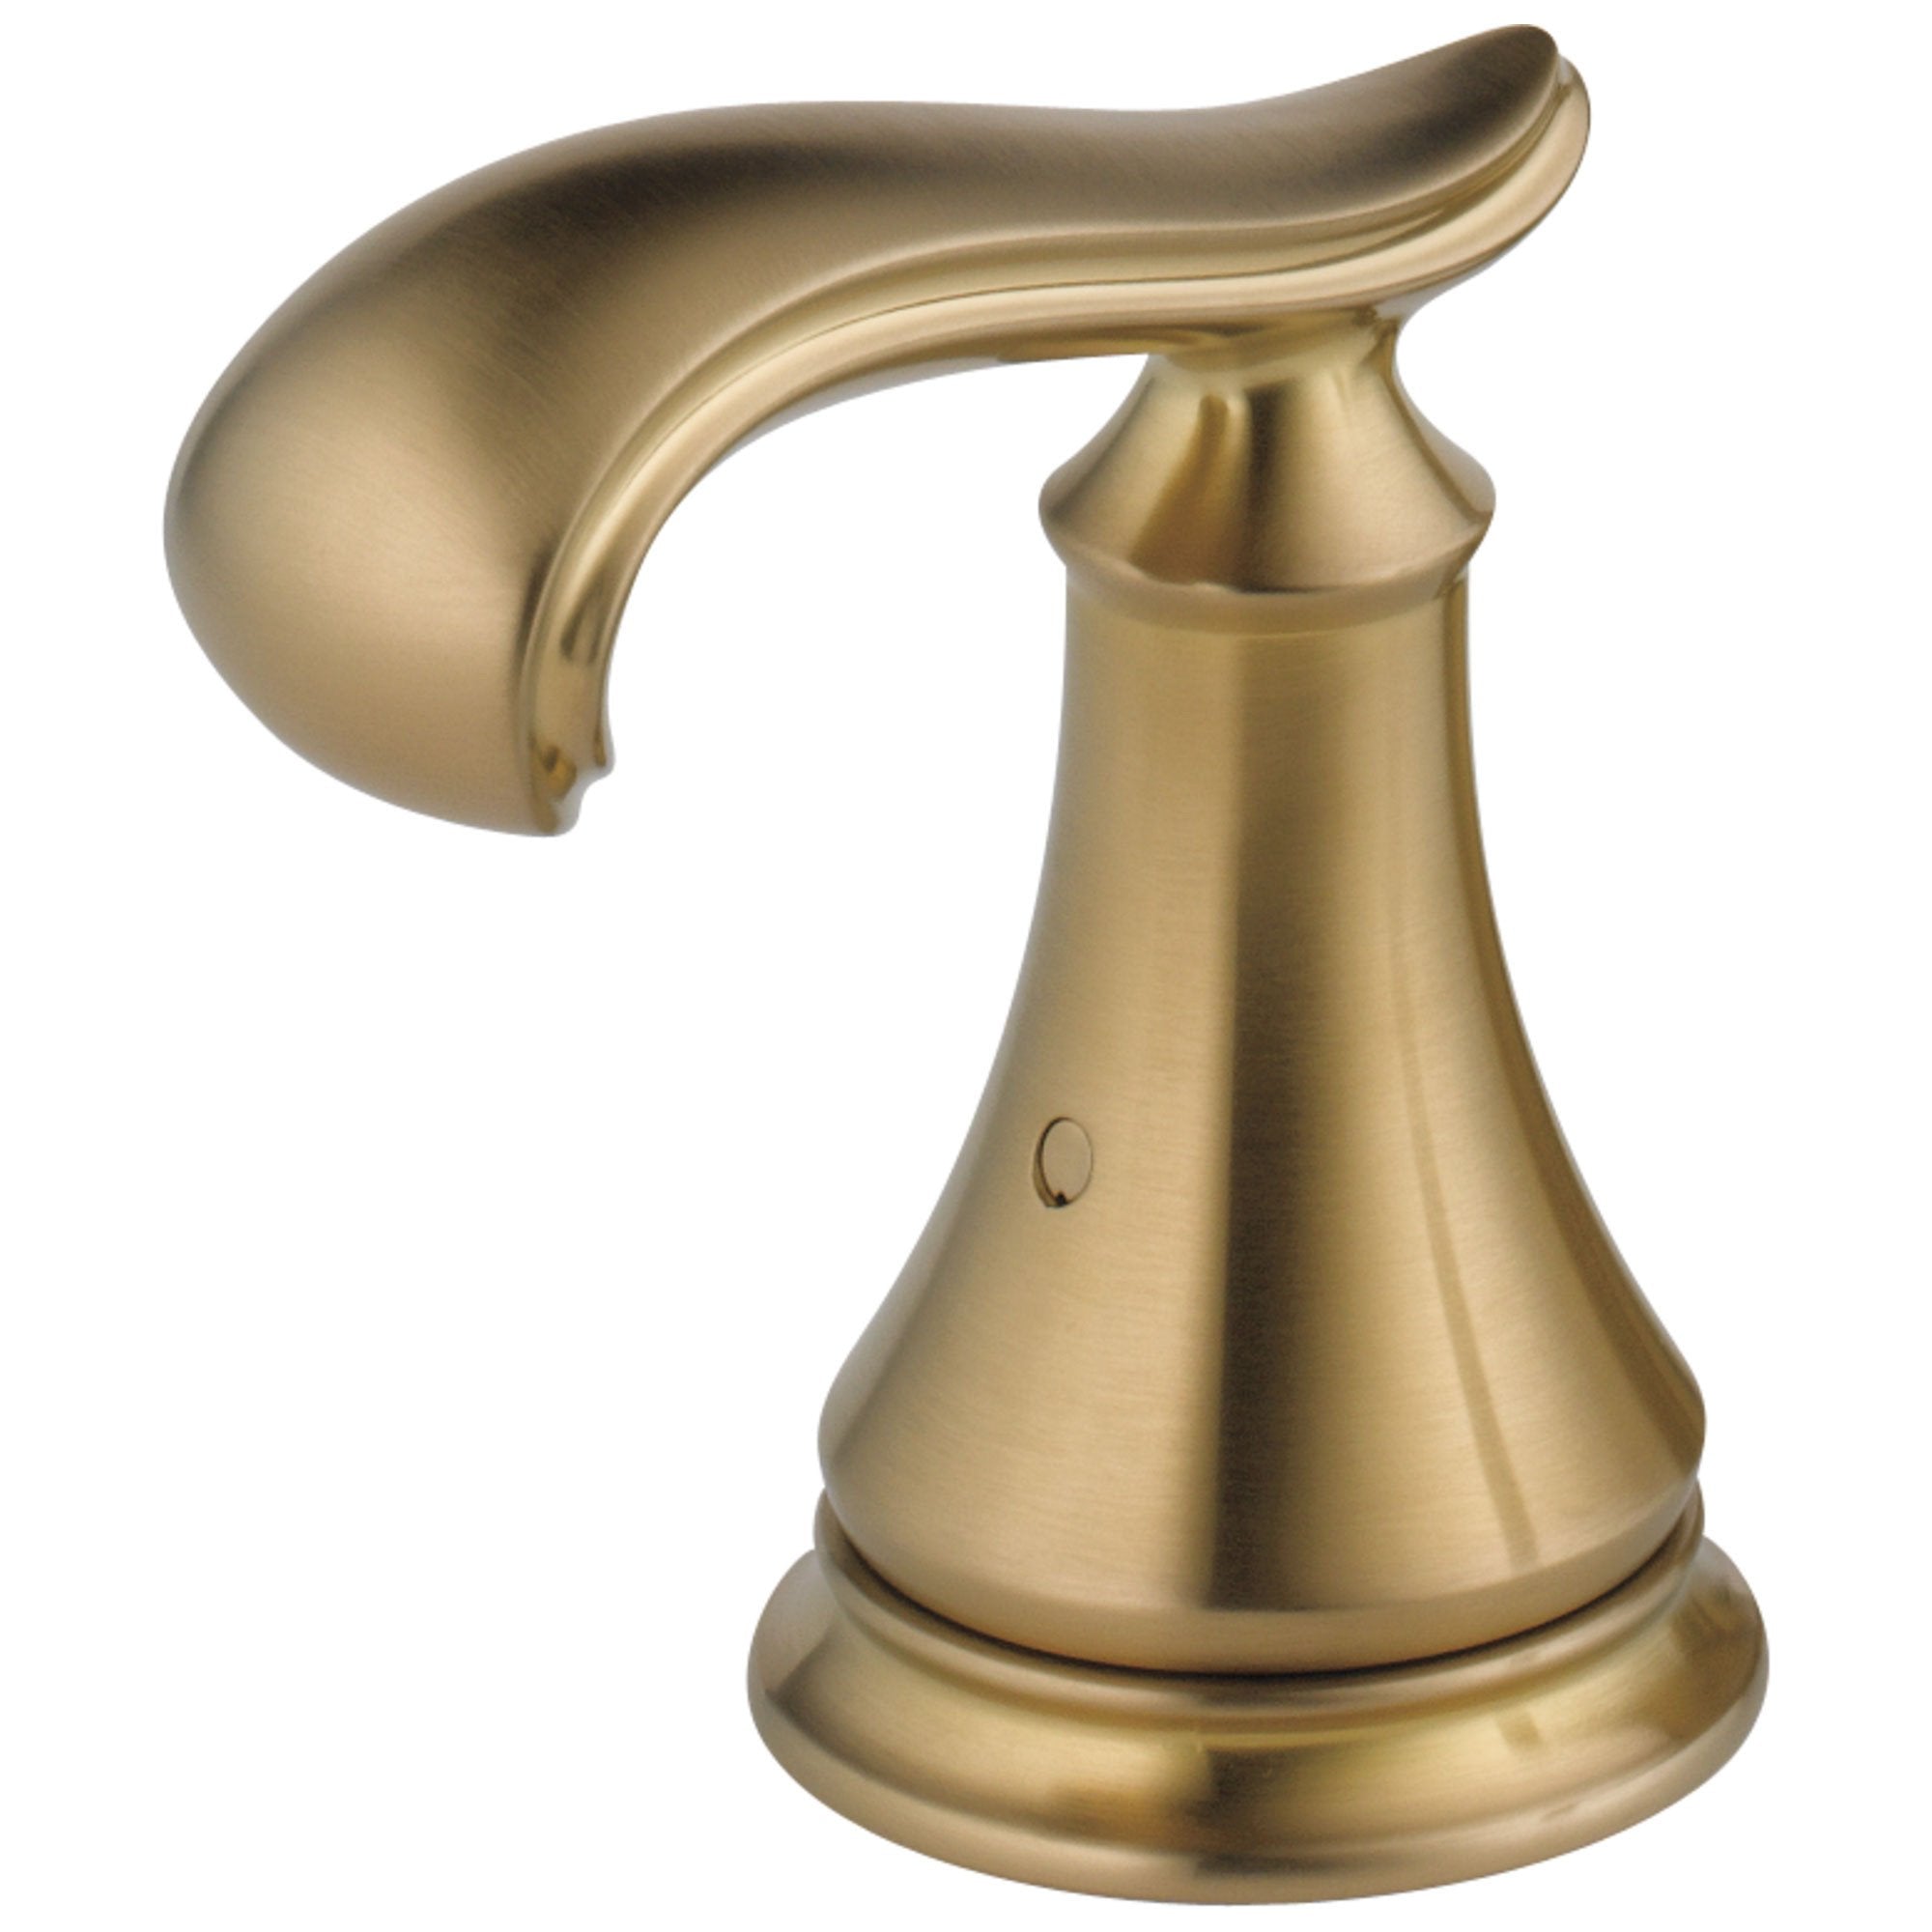 Delta Cassidy Collection Champagne Bronze Finish Roman Tub French Curve Handles - Quantity 2 Included DH698CZ